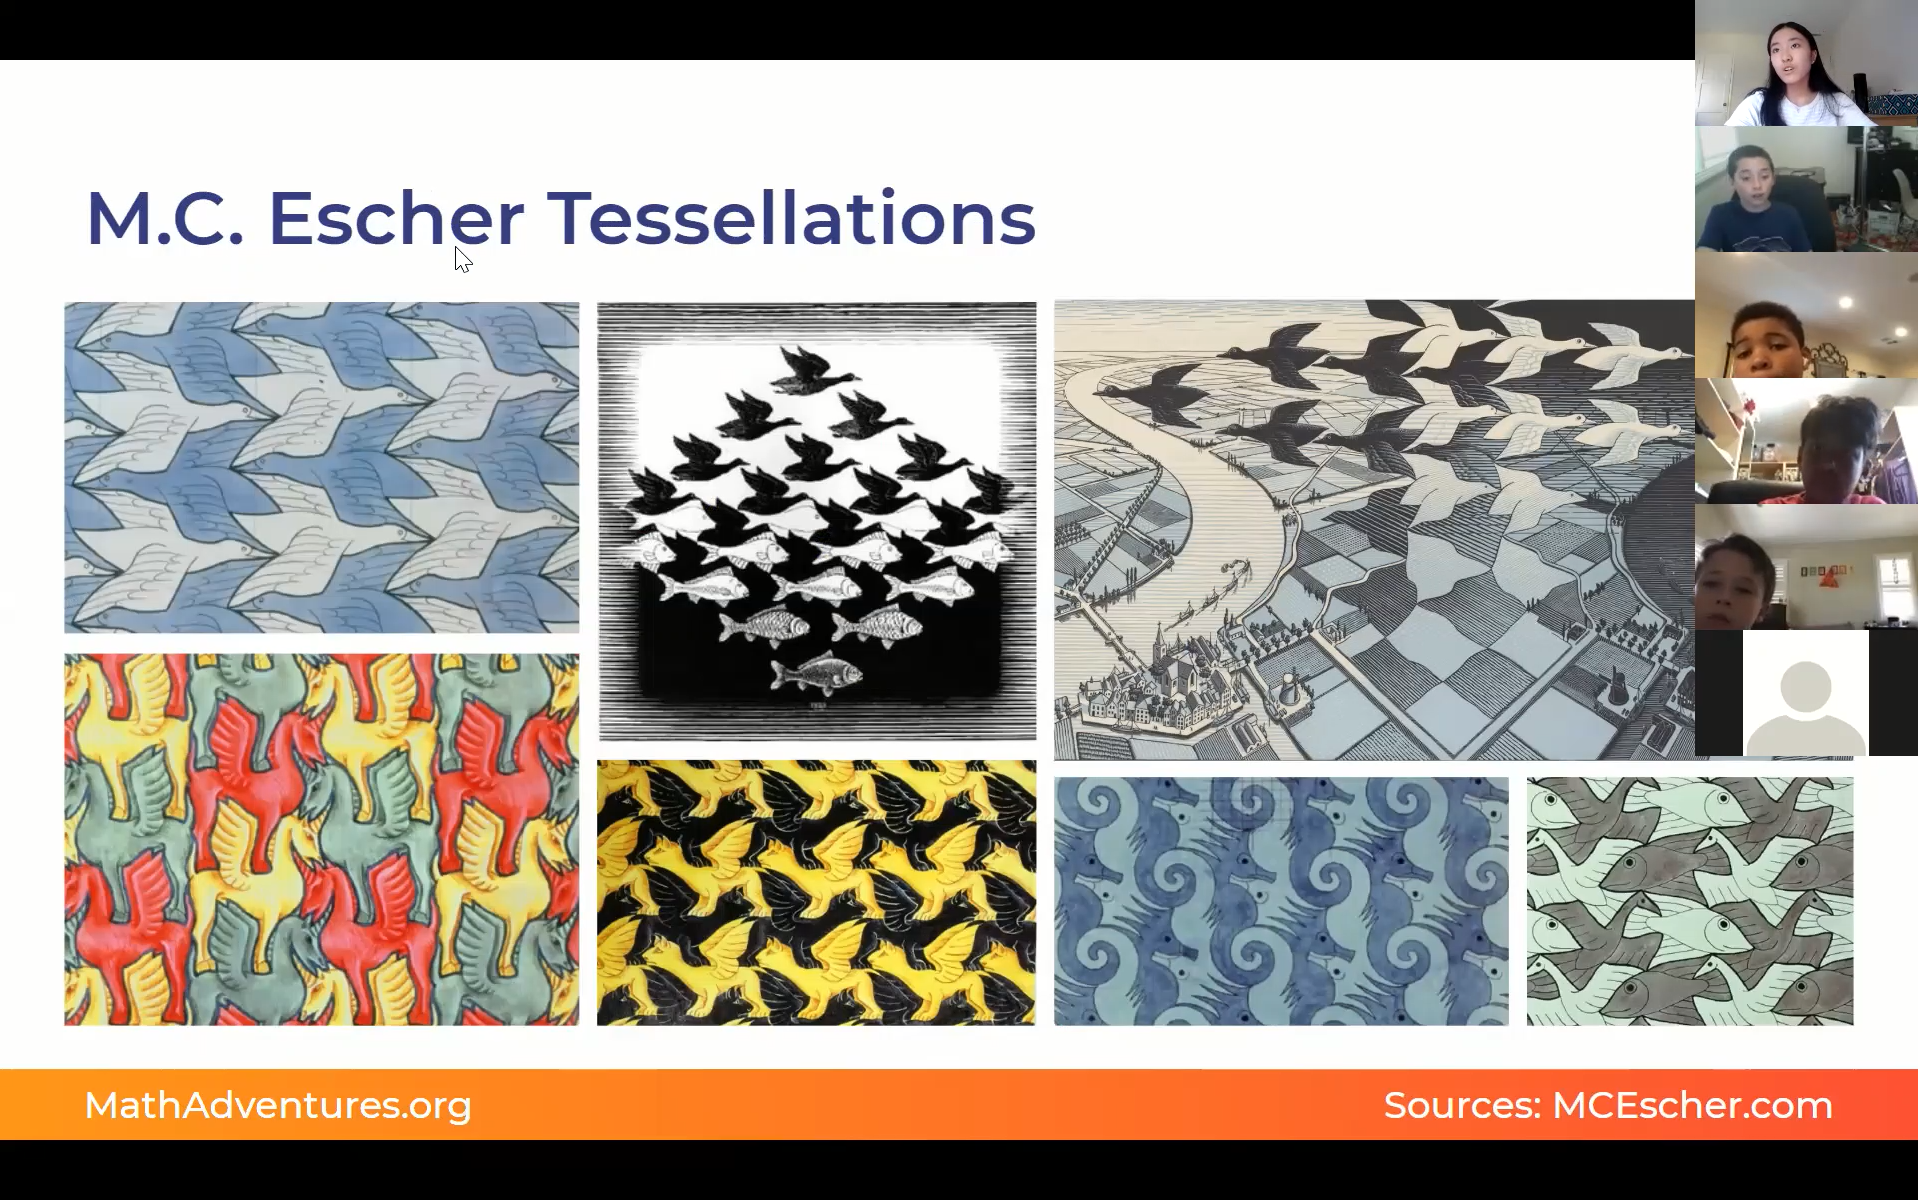 A Math Adventures lesson on tessellations